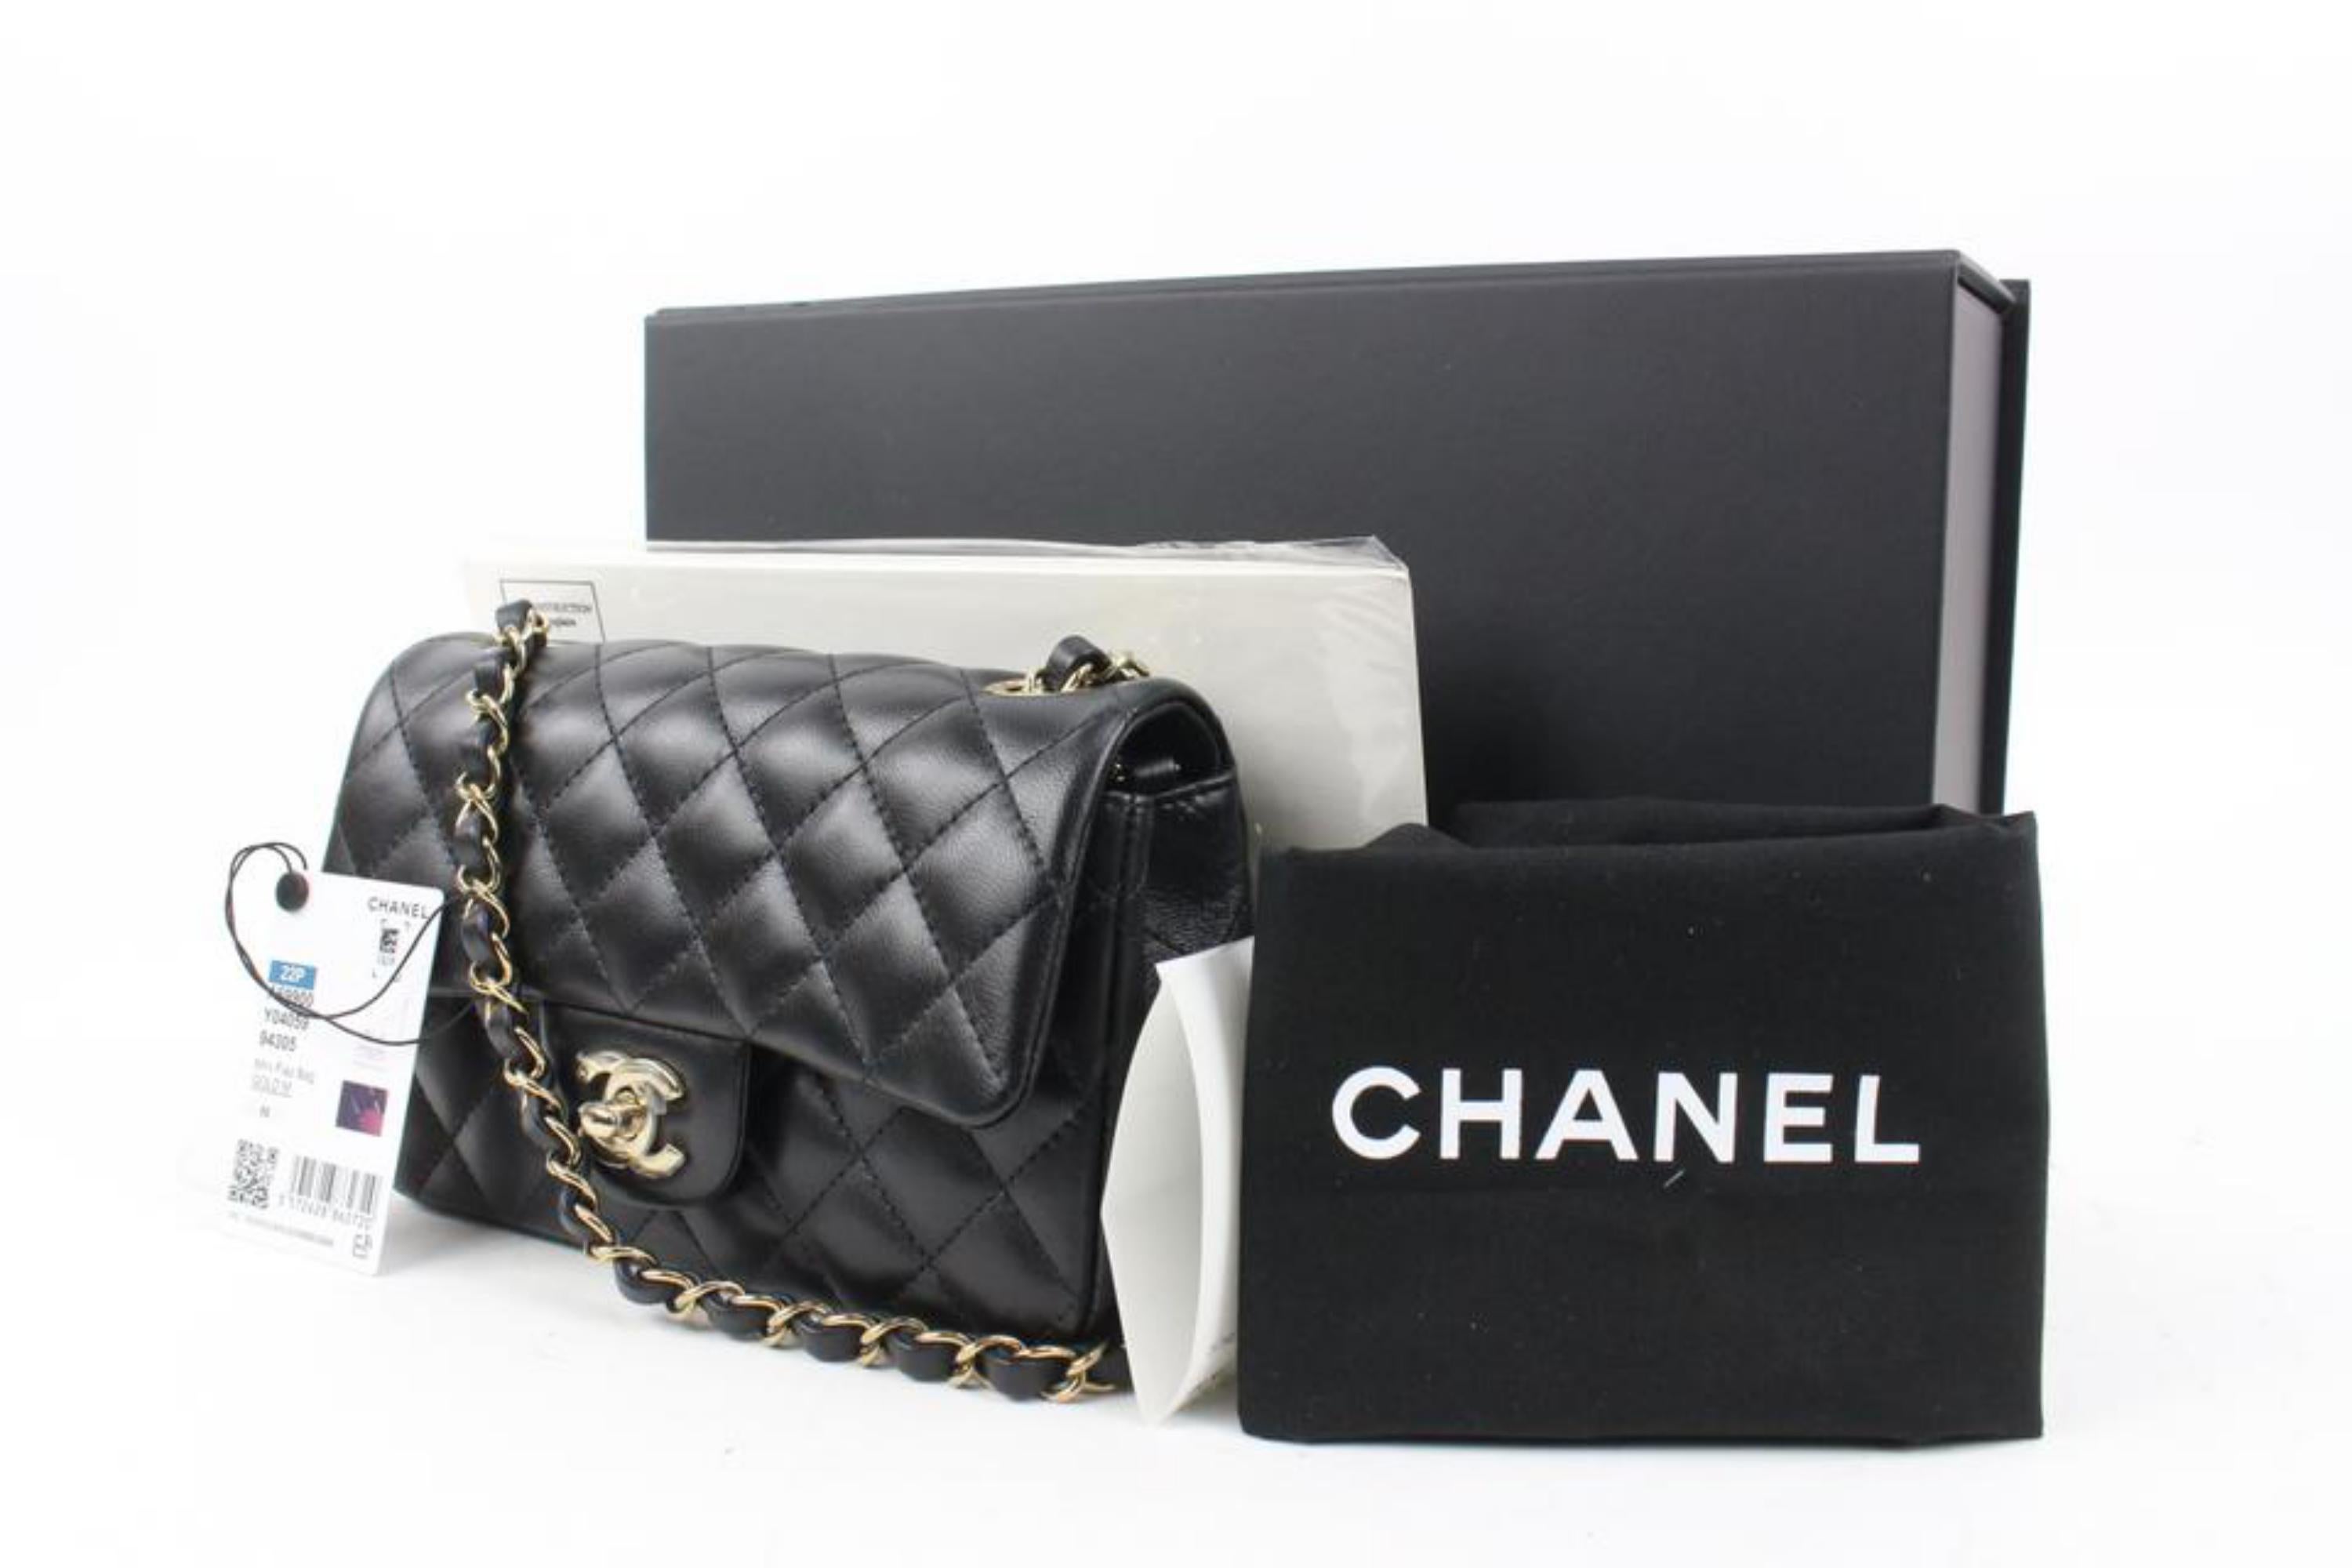 Chanel 22P Black Quilted Lambskin Mini Classic Flap Gold Chain Bag s215ca93
Date Code/Serial Number: T2CG1GU7
Made In: Italy
Measurements: Length:  7.75